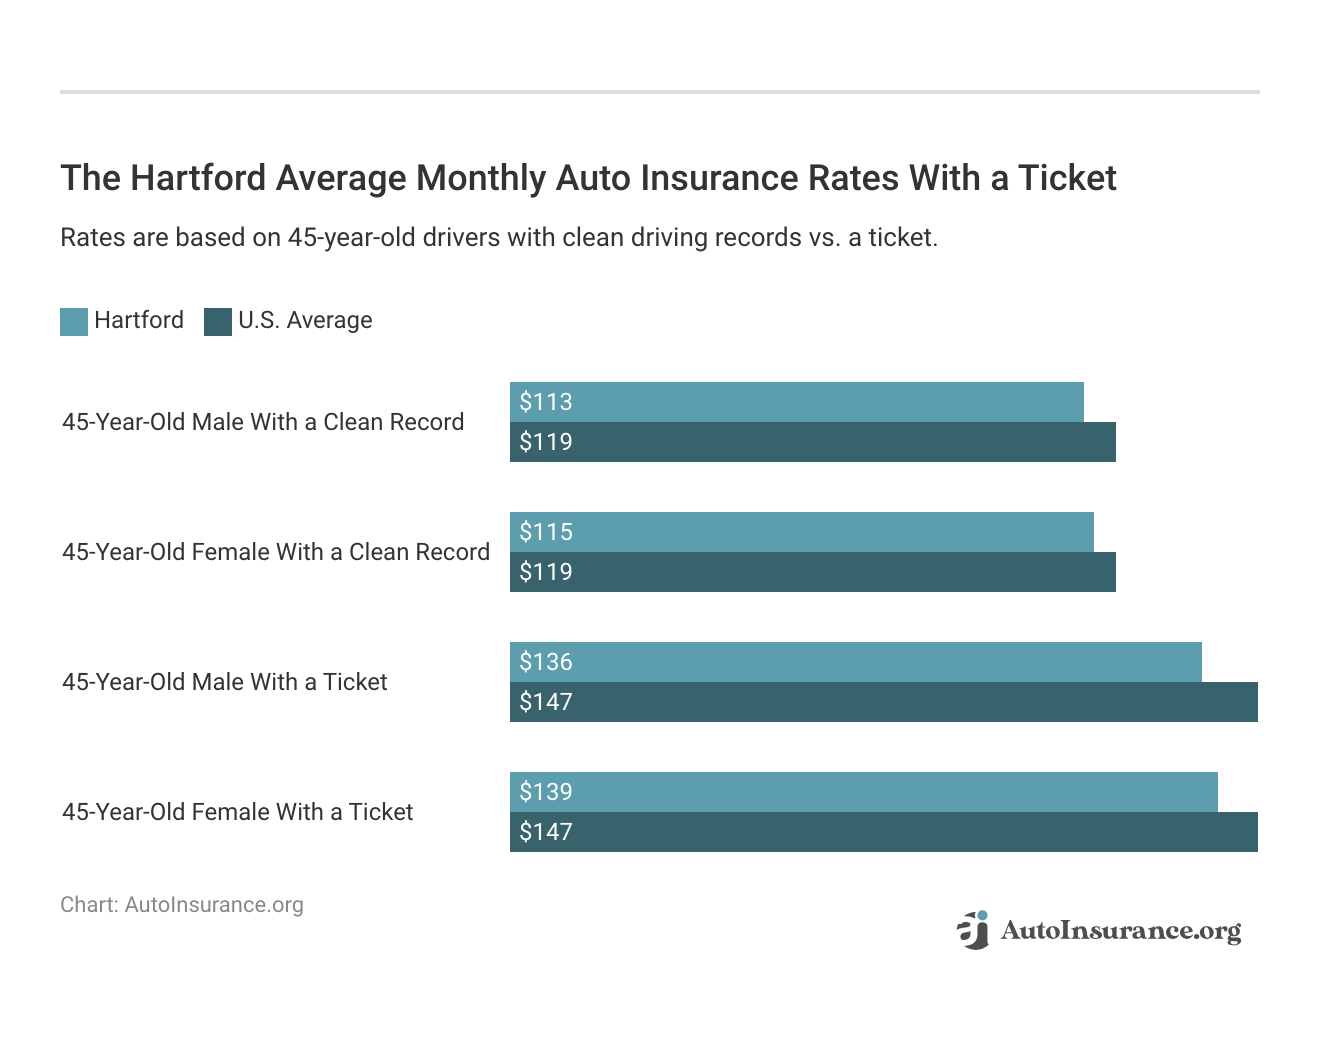 <h3>The Hartford Average Monthly Auto Insurance Rates With a Ticket</h3>